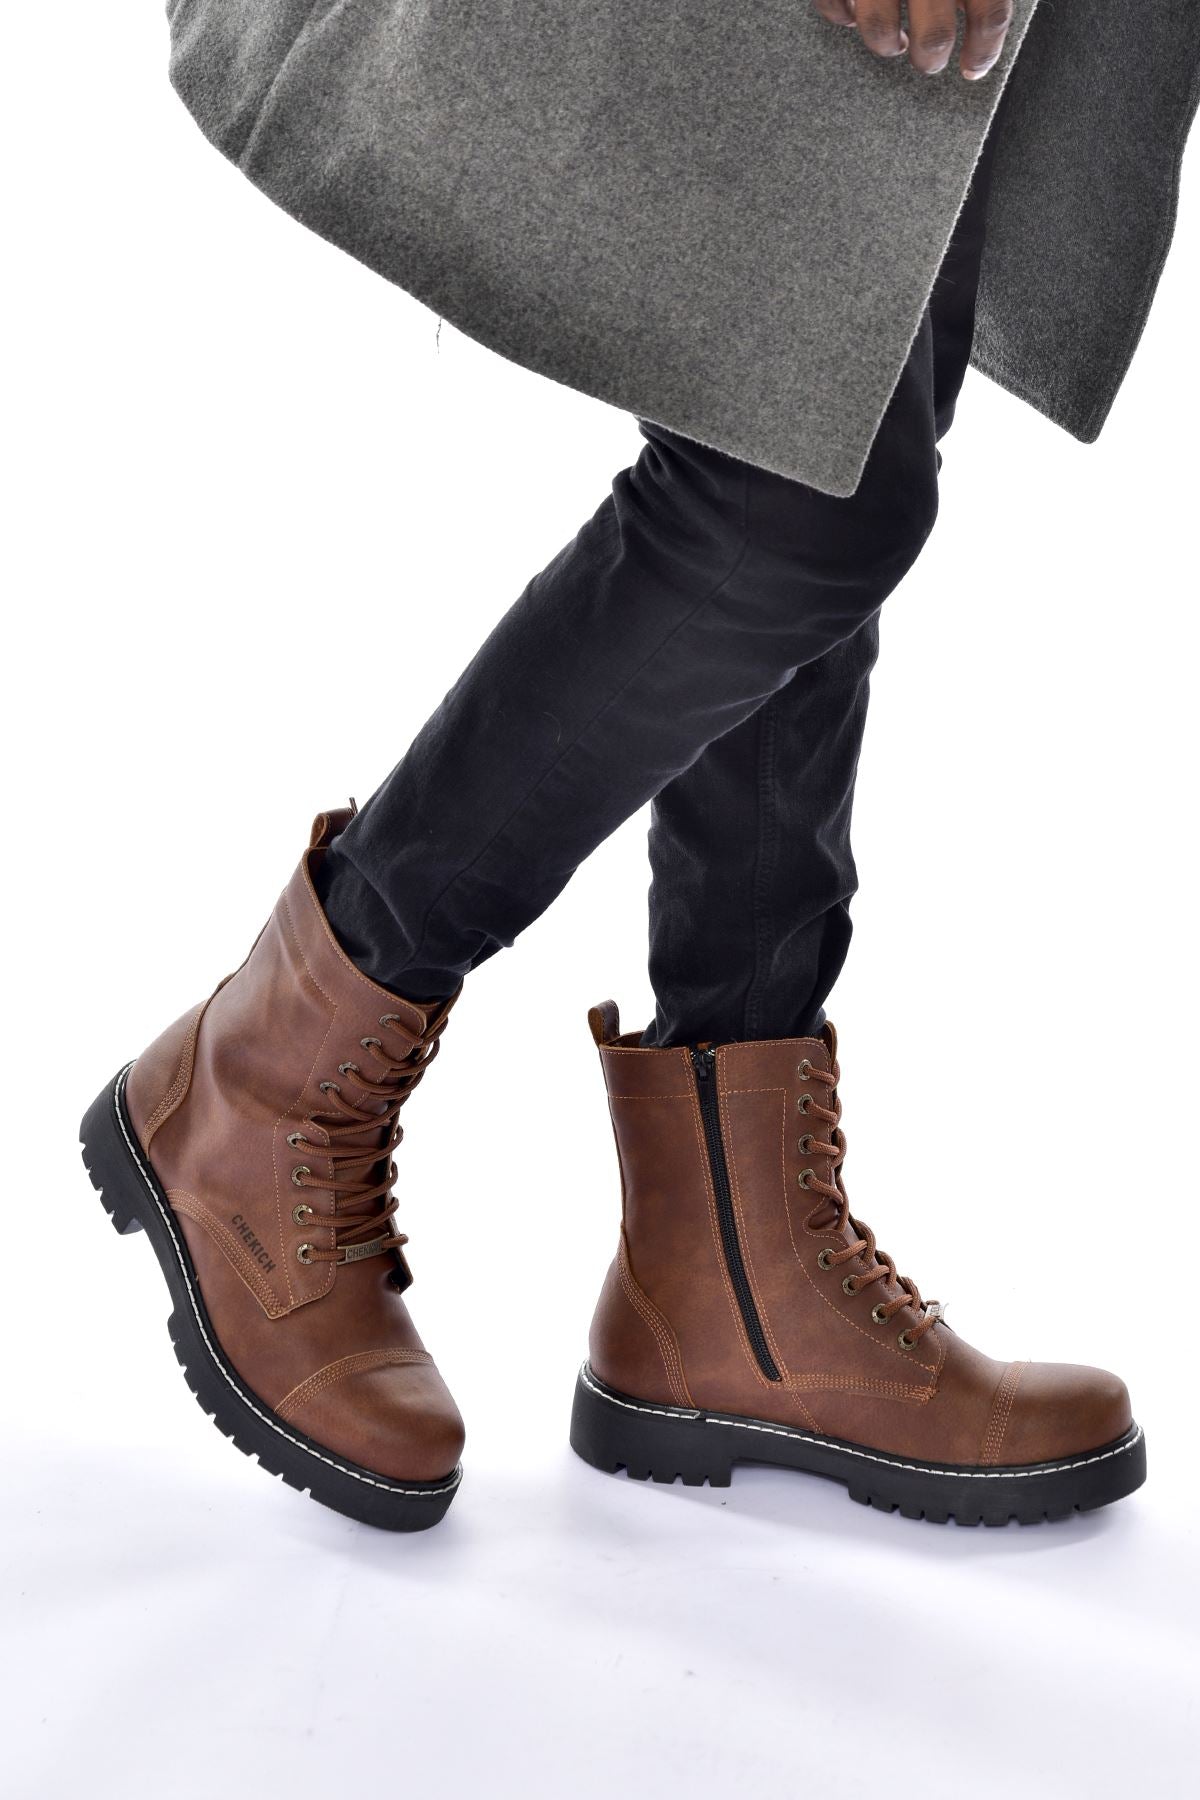 CH009 Men's Leather Brown-Black Sole Casual Winter Boots - STREETMODE ™